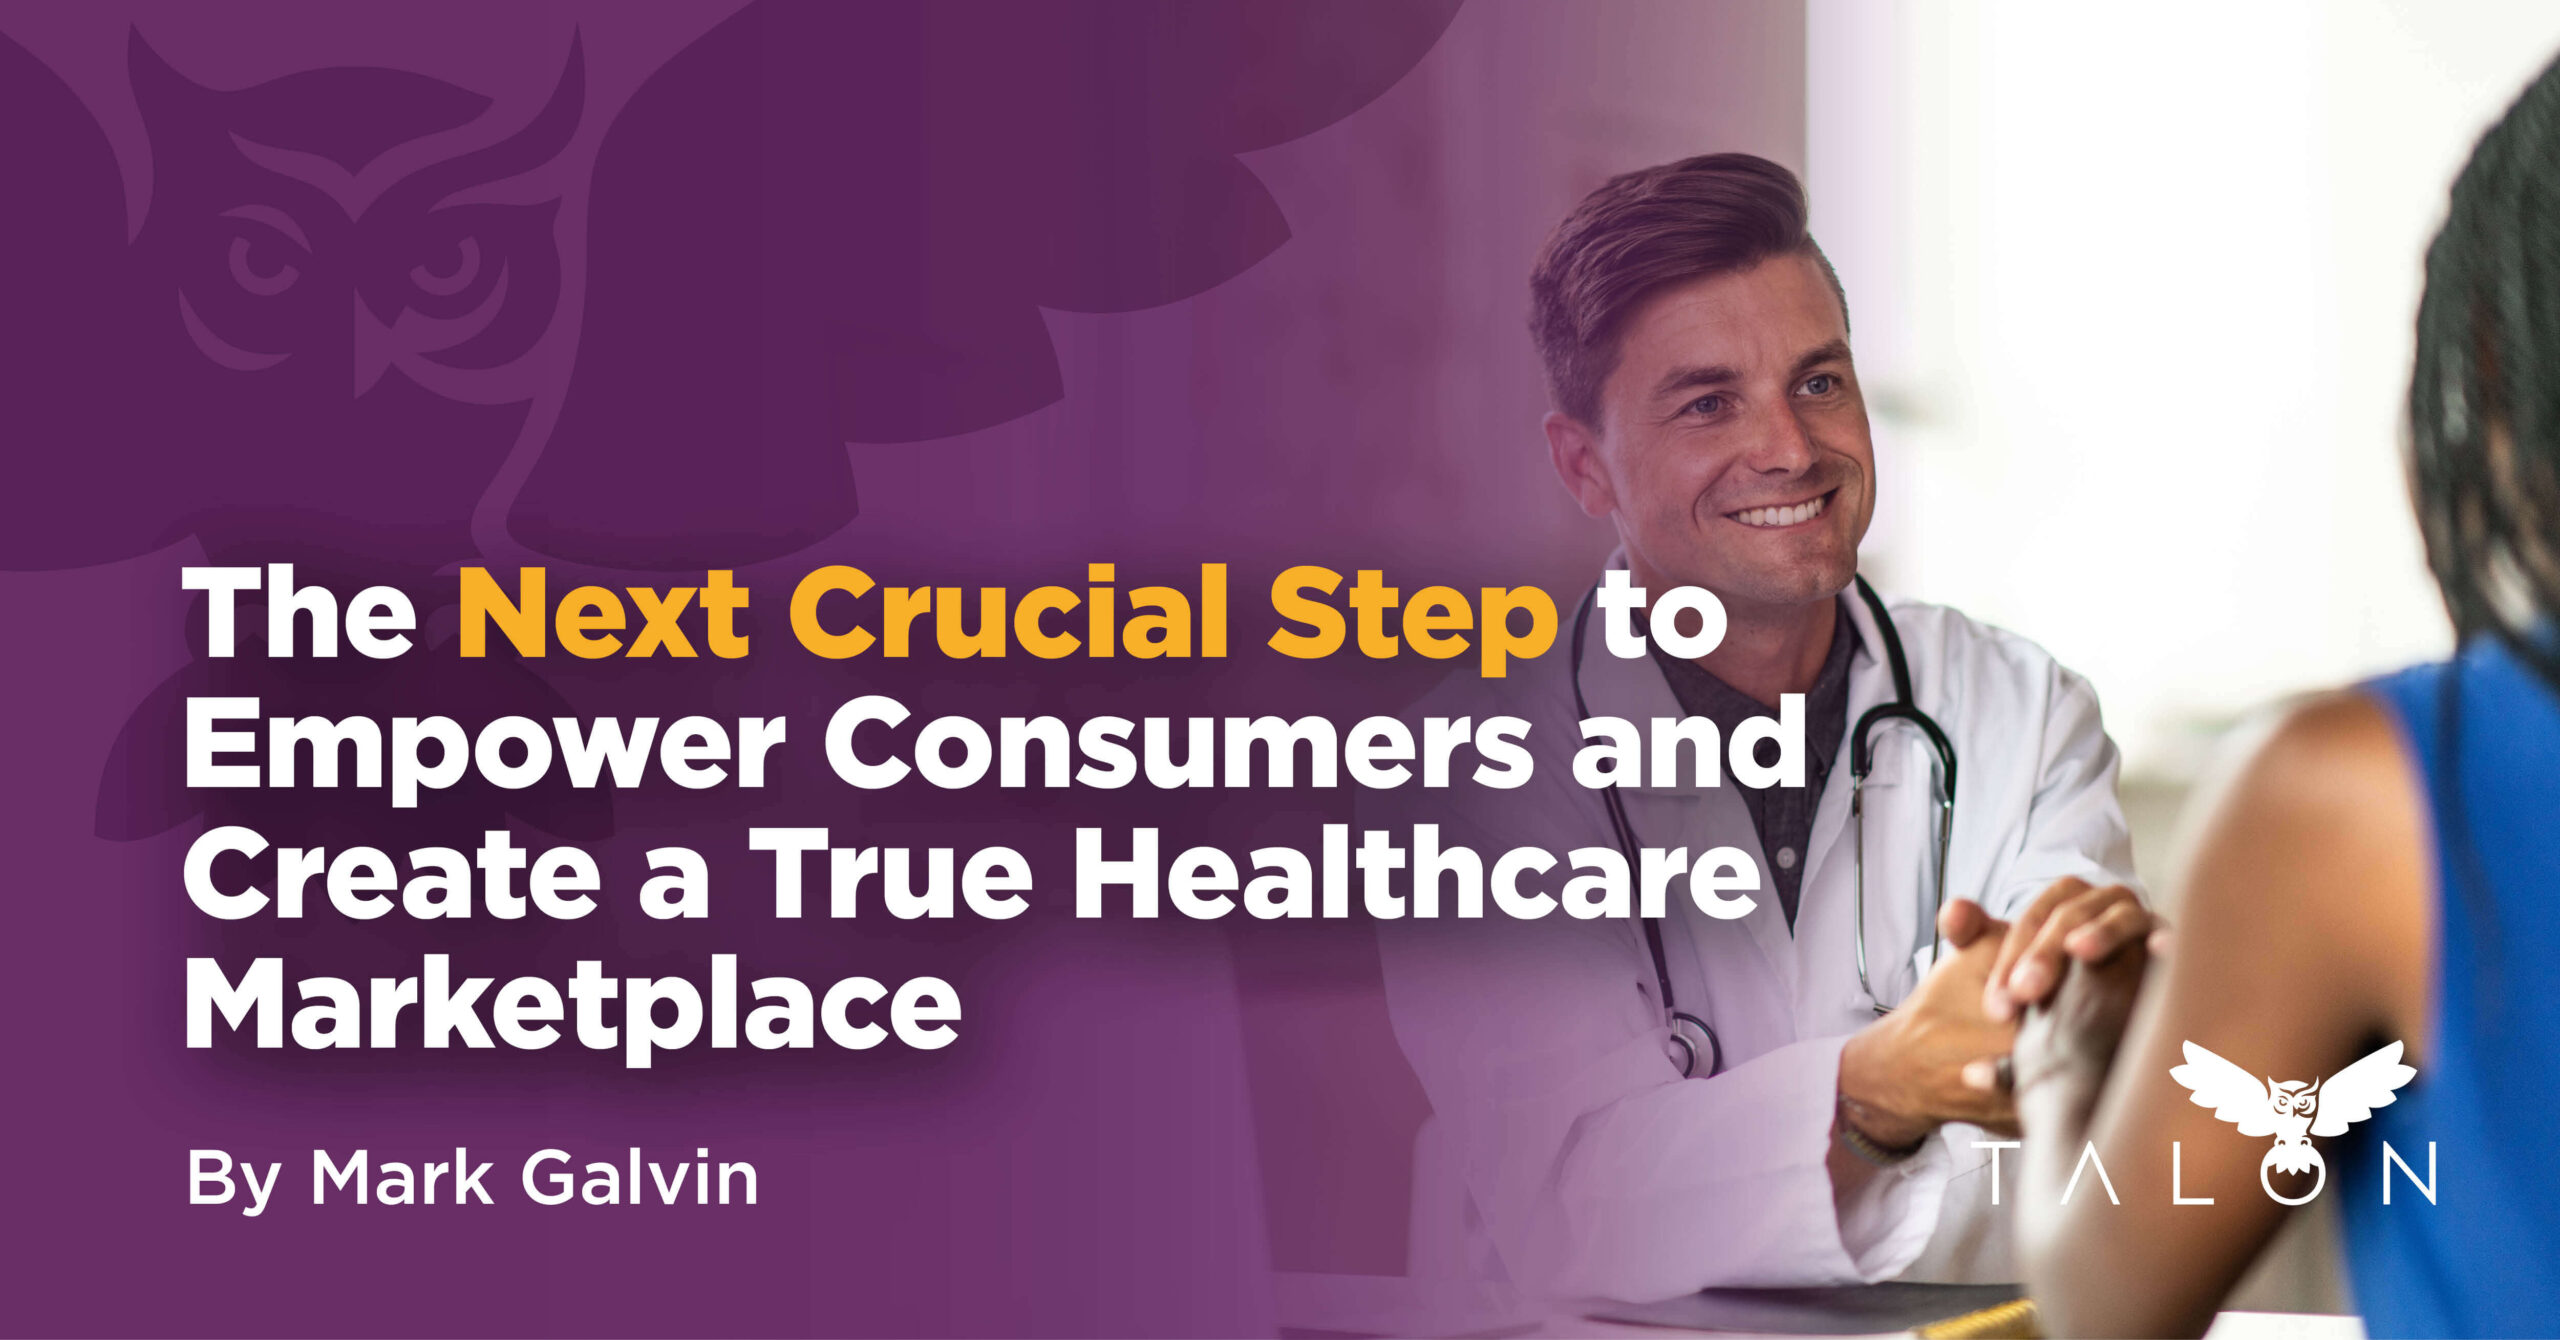 The Next Crucial Step to Empower Consumers and Create a True Healthcare marketplace by Mark Galvin